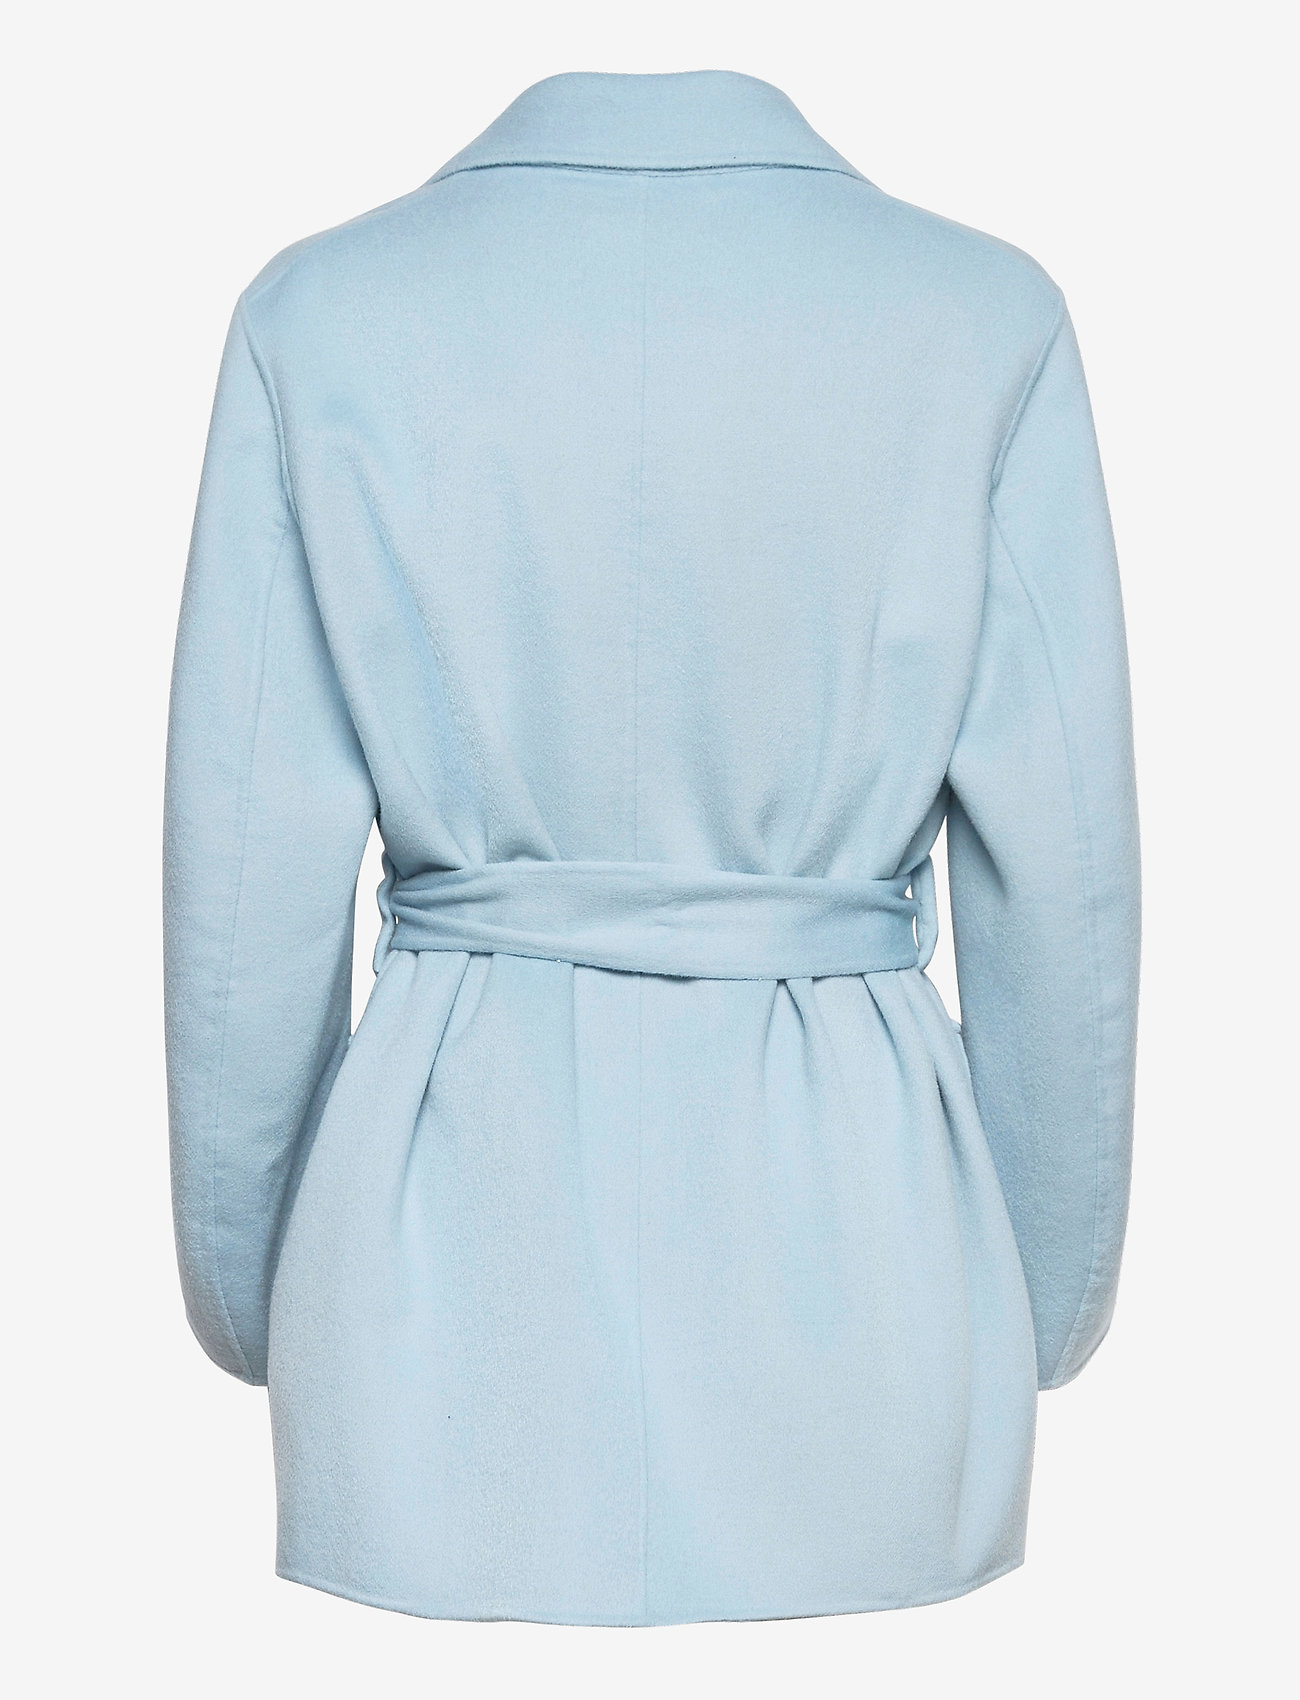 Dorothee Schumacher Exciting Volumes Jacket (Cloudy Mint) - 4950 kr ...